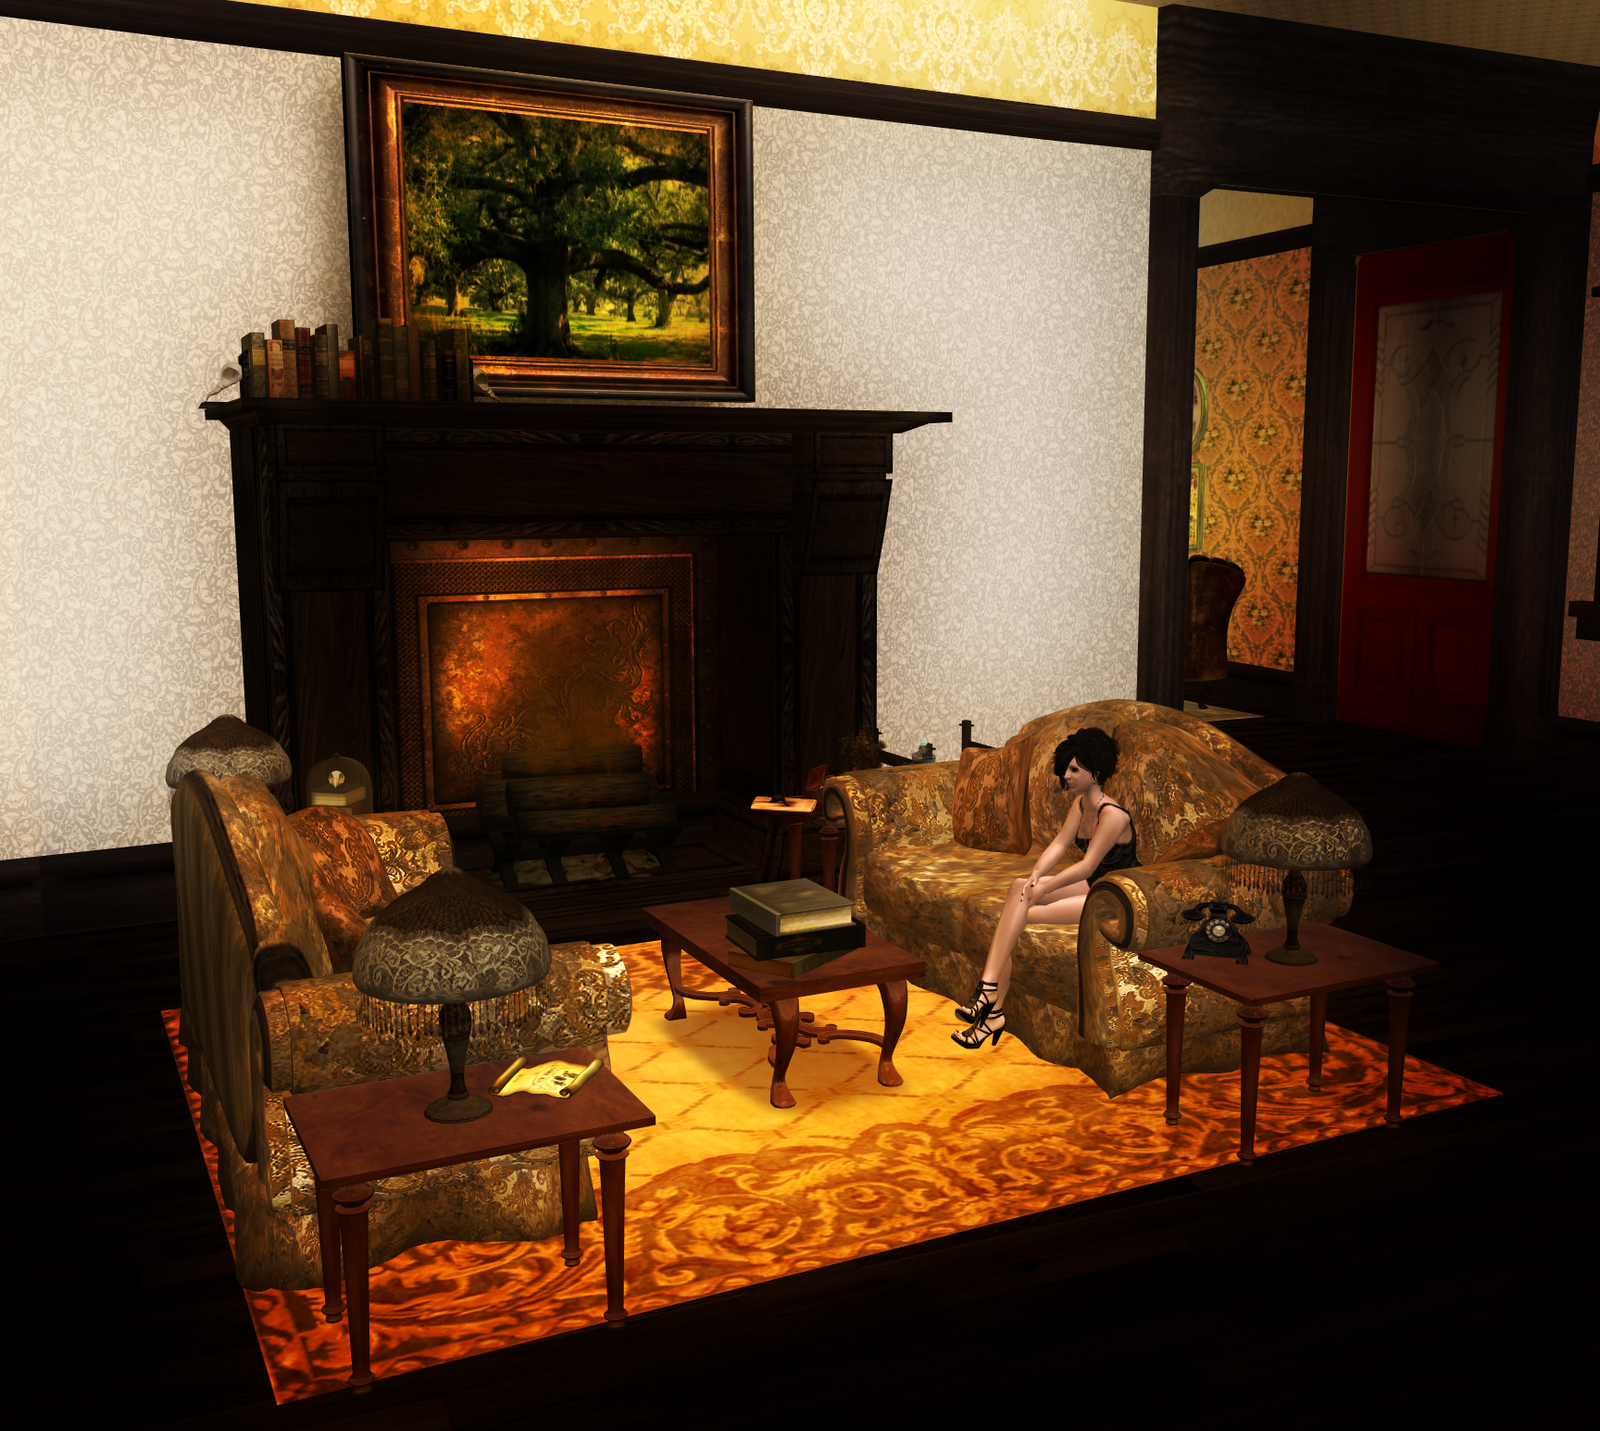 SL House and Decorating Addict: July 2011